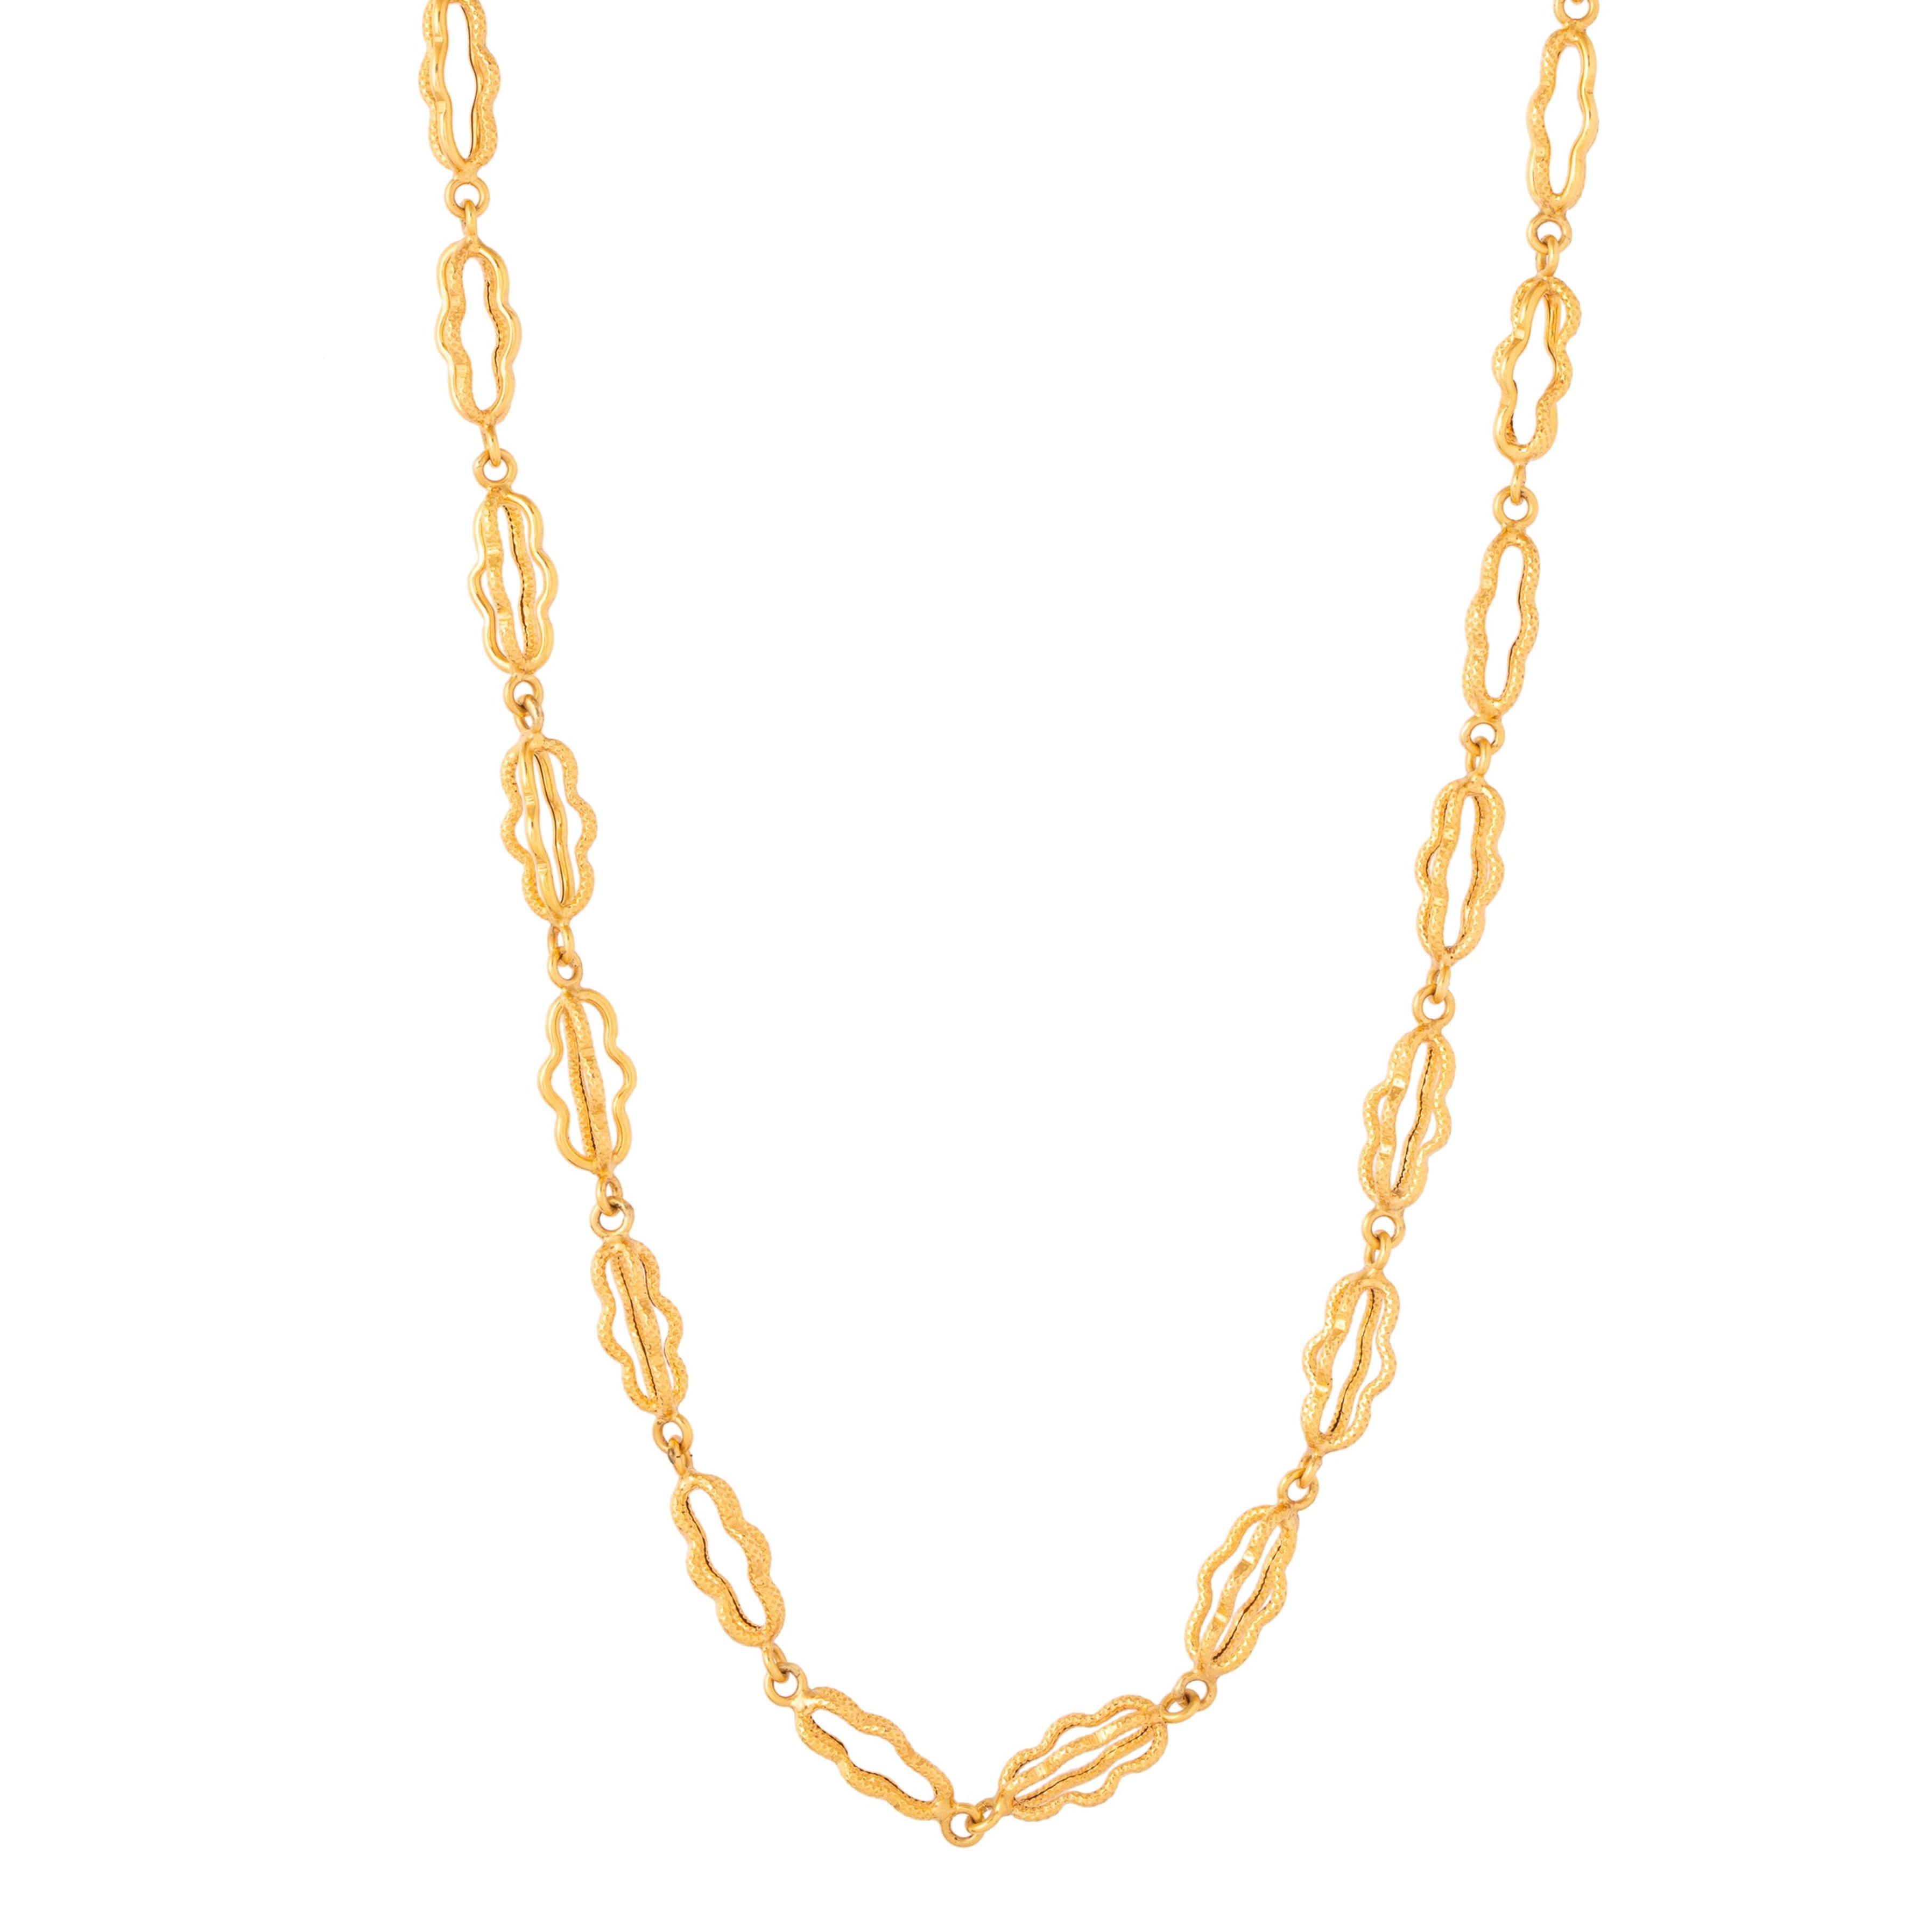 Fancy Link 37" 18k Gold Chain Necklace